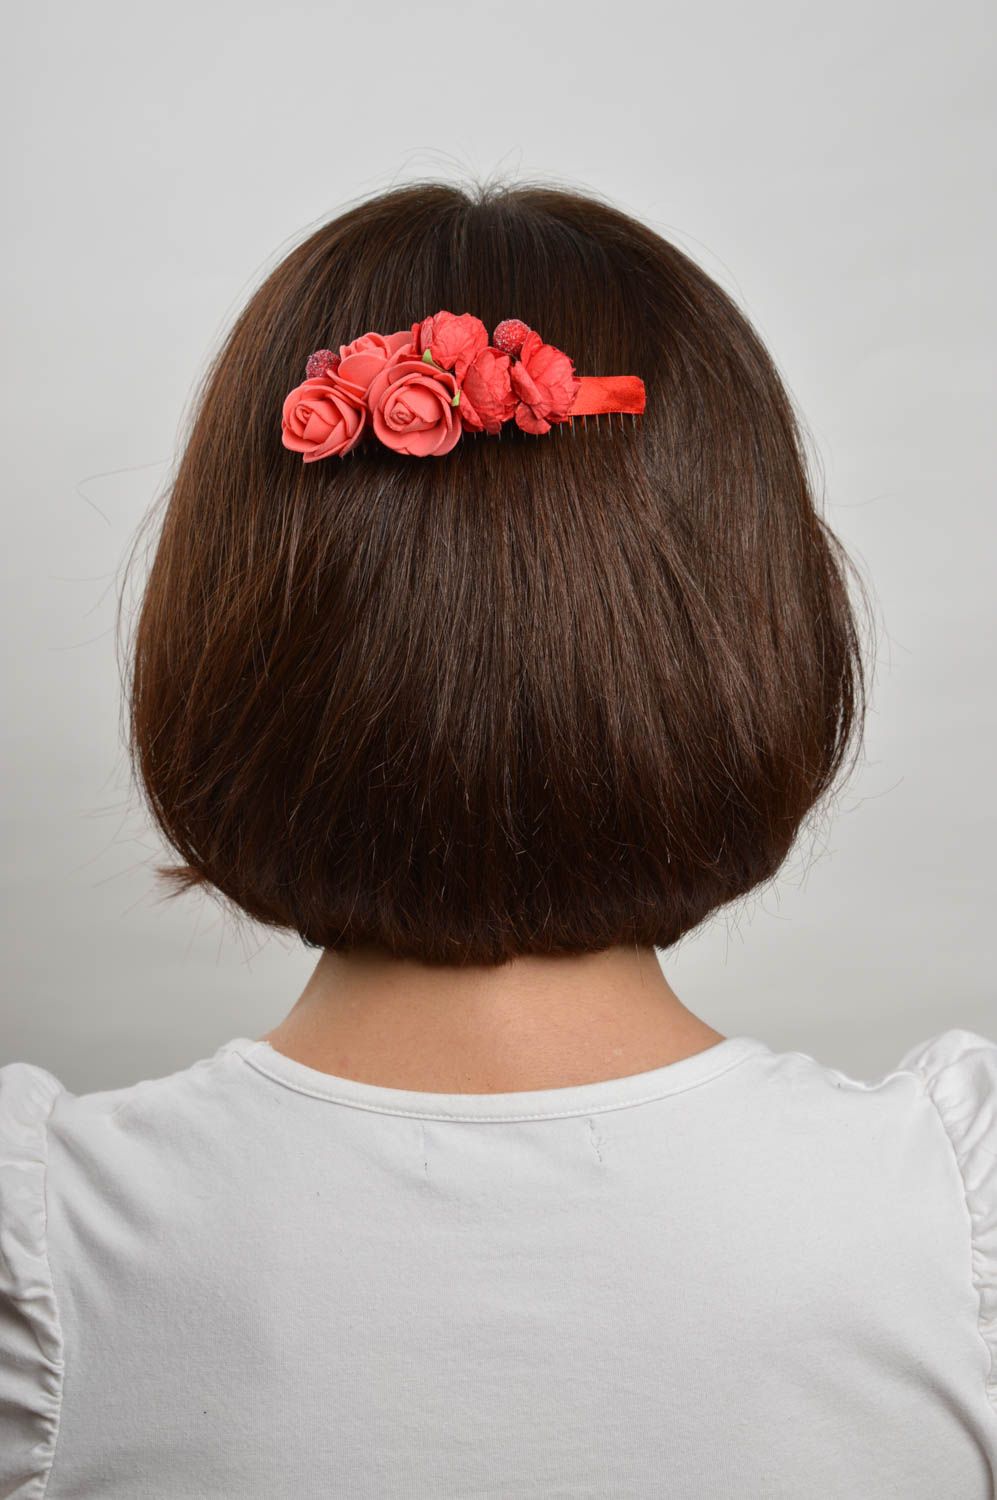 Handmade hair comb elegant hair flowers in hair beautiful gifts for her photo 1